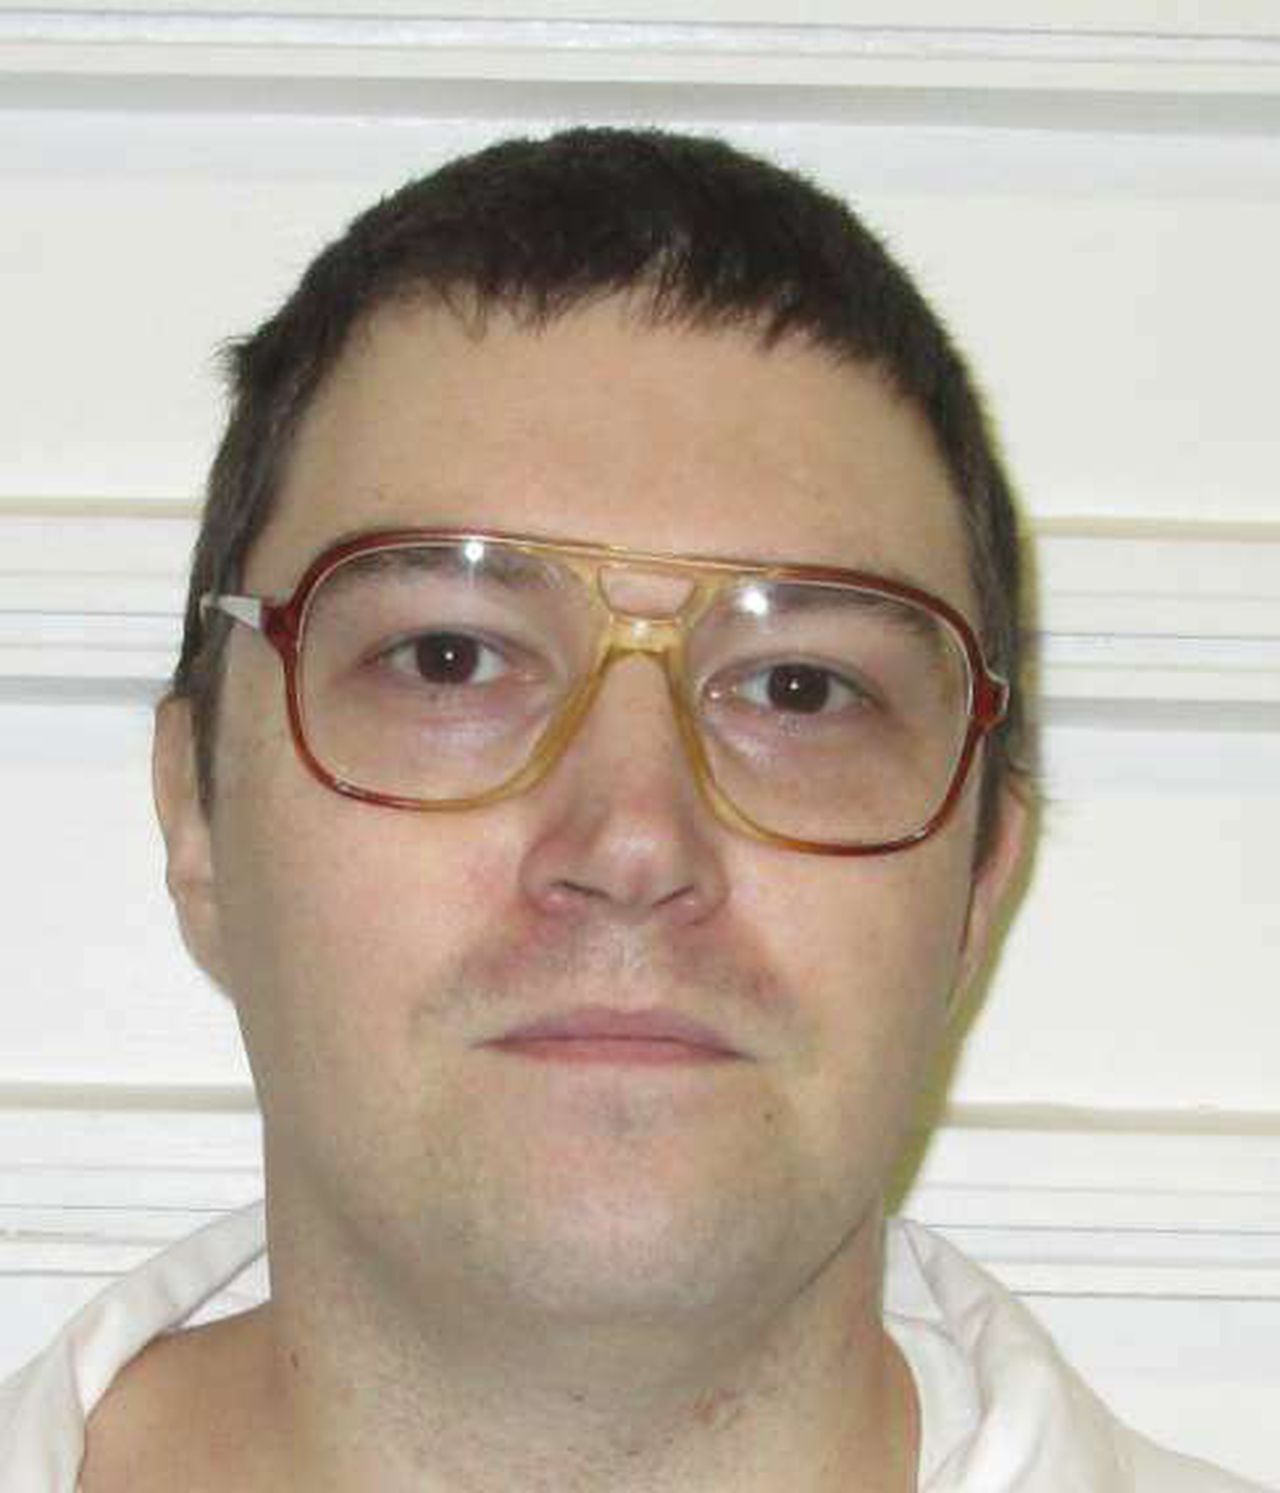 Federal judge orders AG to turn over 2004 ‘confession’ from Alabama Death Row inmate’s accomplice